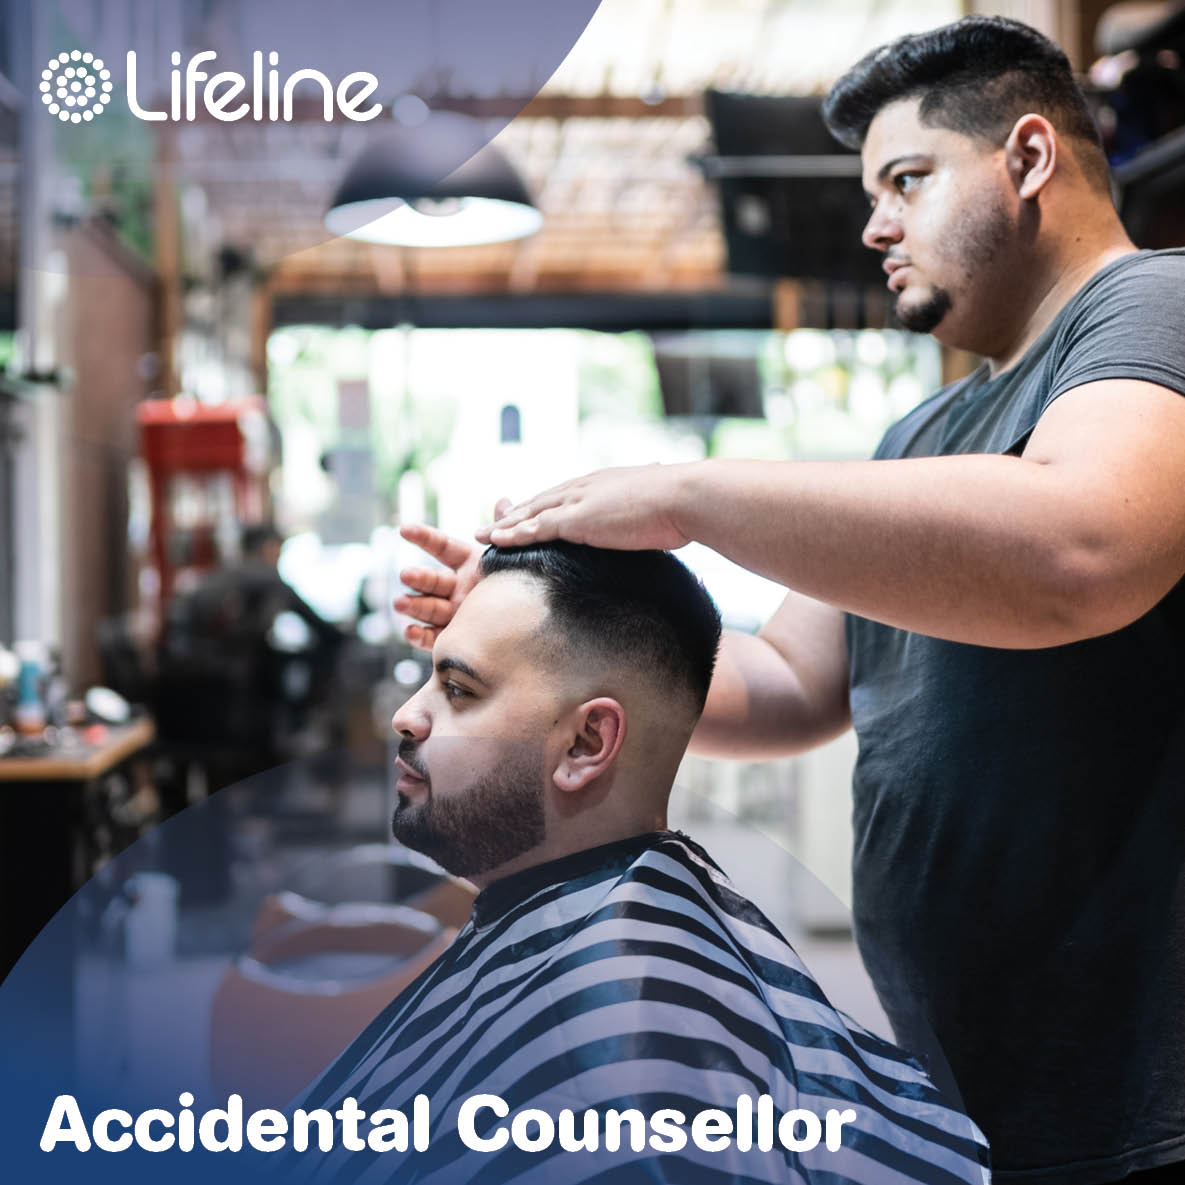 Our Accidental Counsellor course is aimed at anyone who would like to be able to safely and effectively support friends, family, colleagues, and peers who may be in distress or experiencing a crisis. ow.ly/WwzB50PgNJX